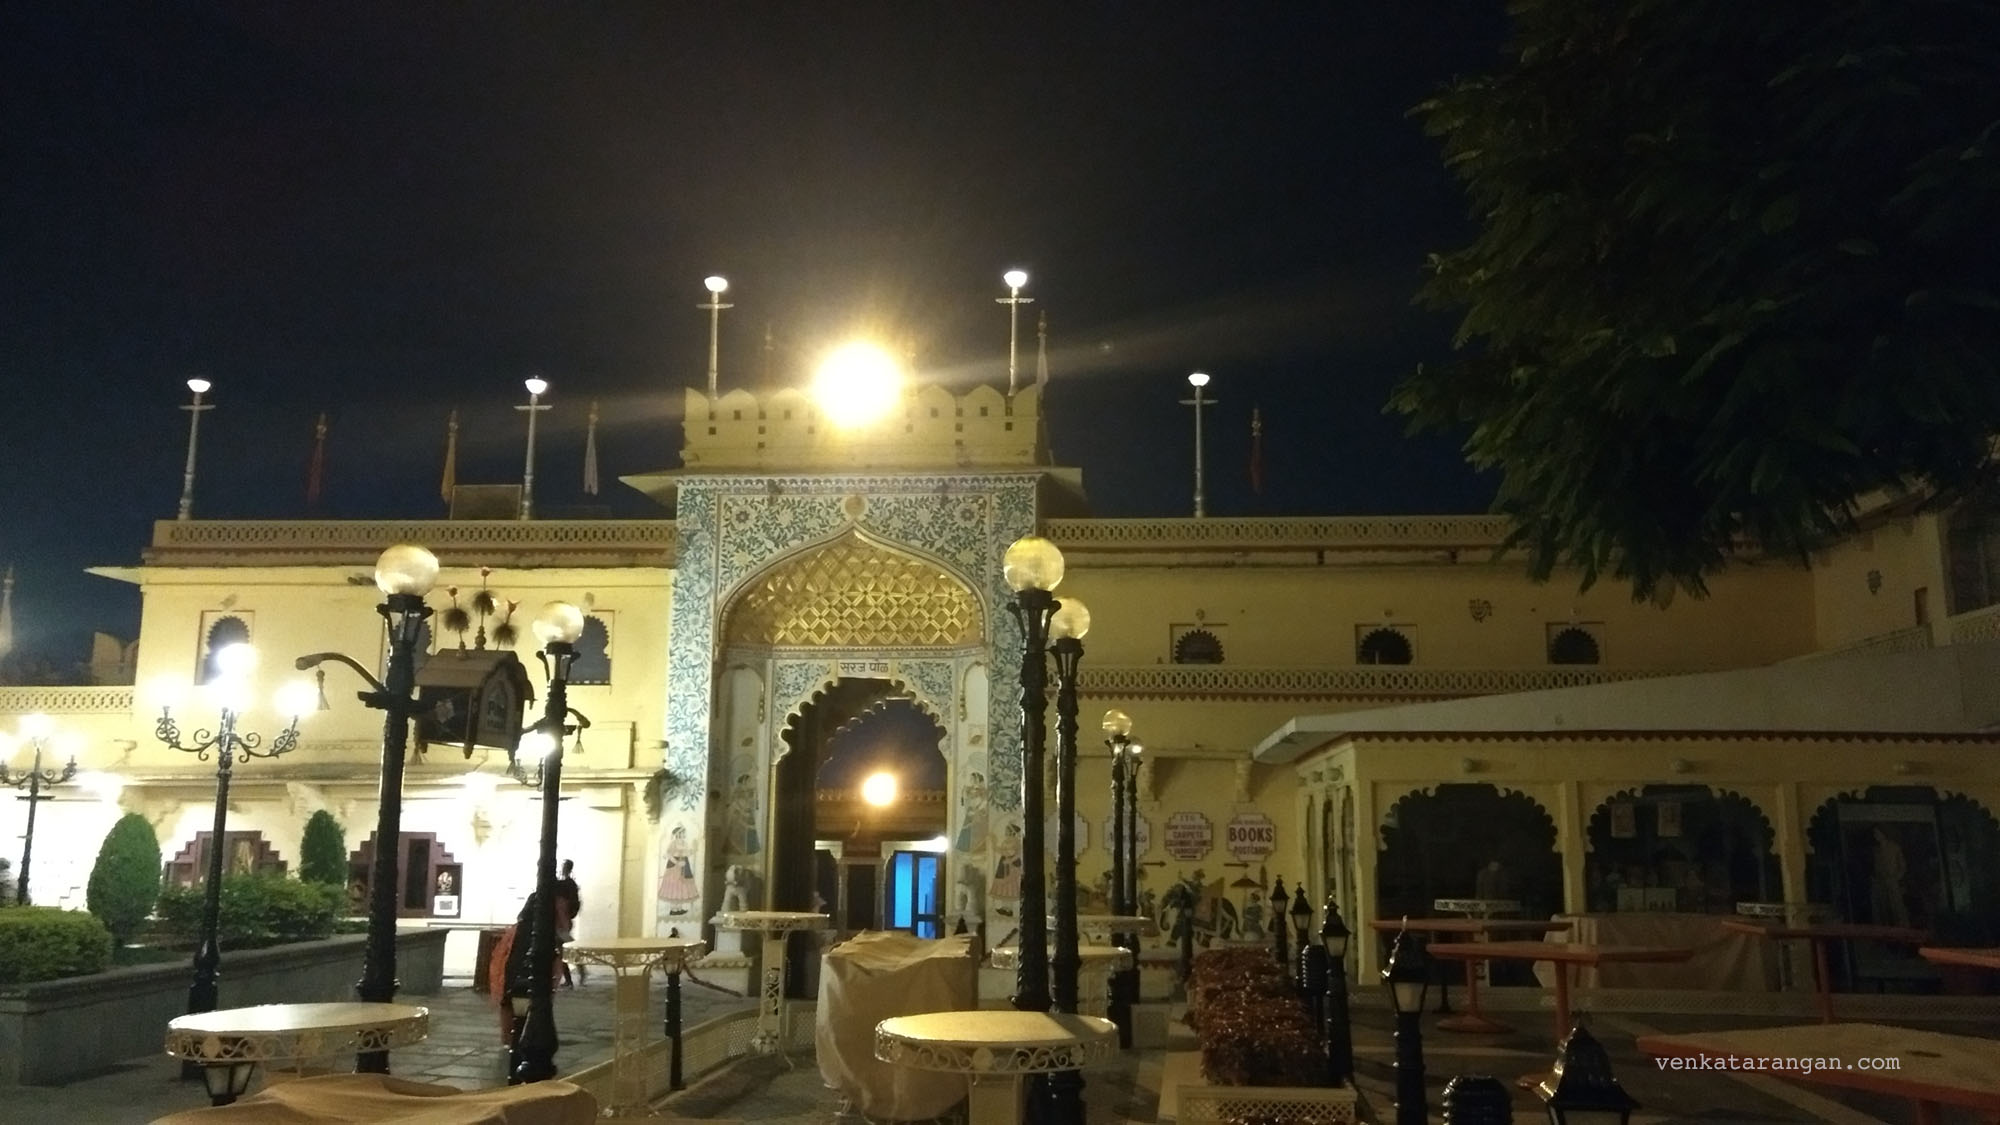 The food court at the City Palace of Udaipur 